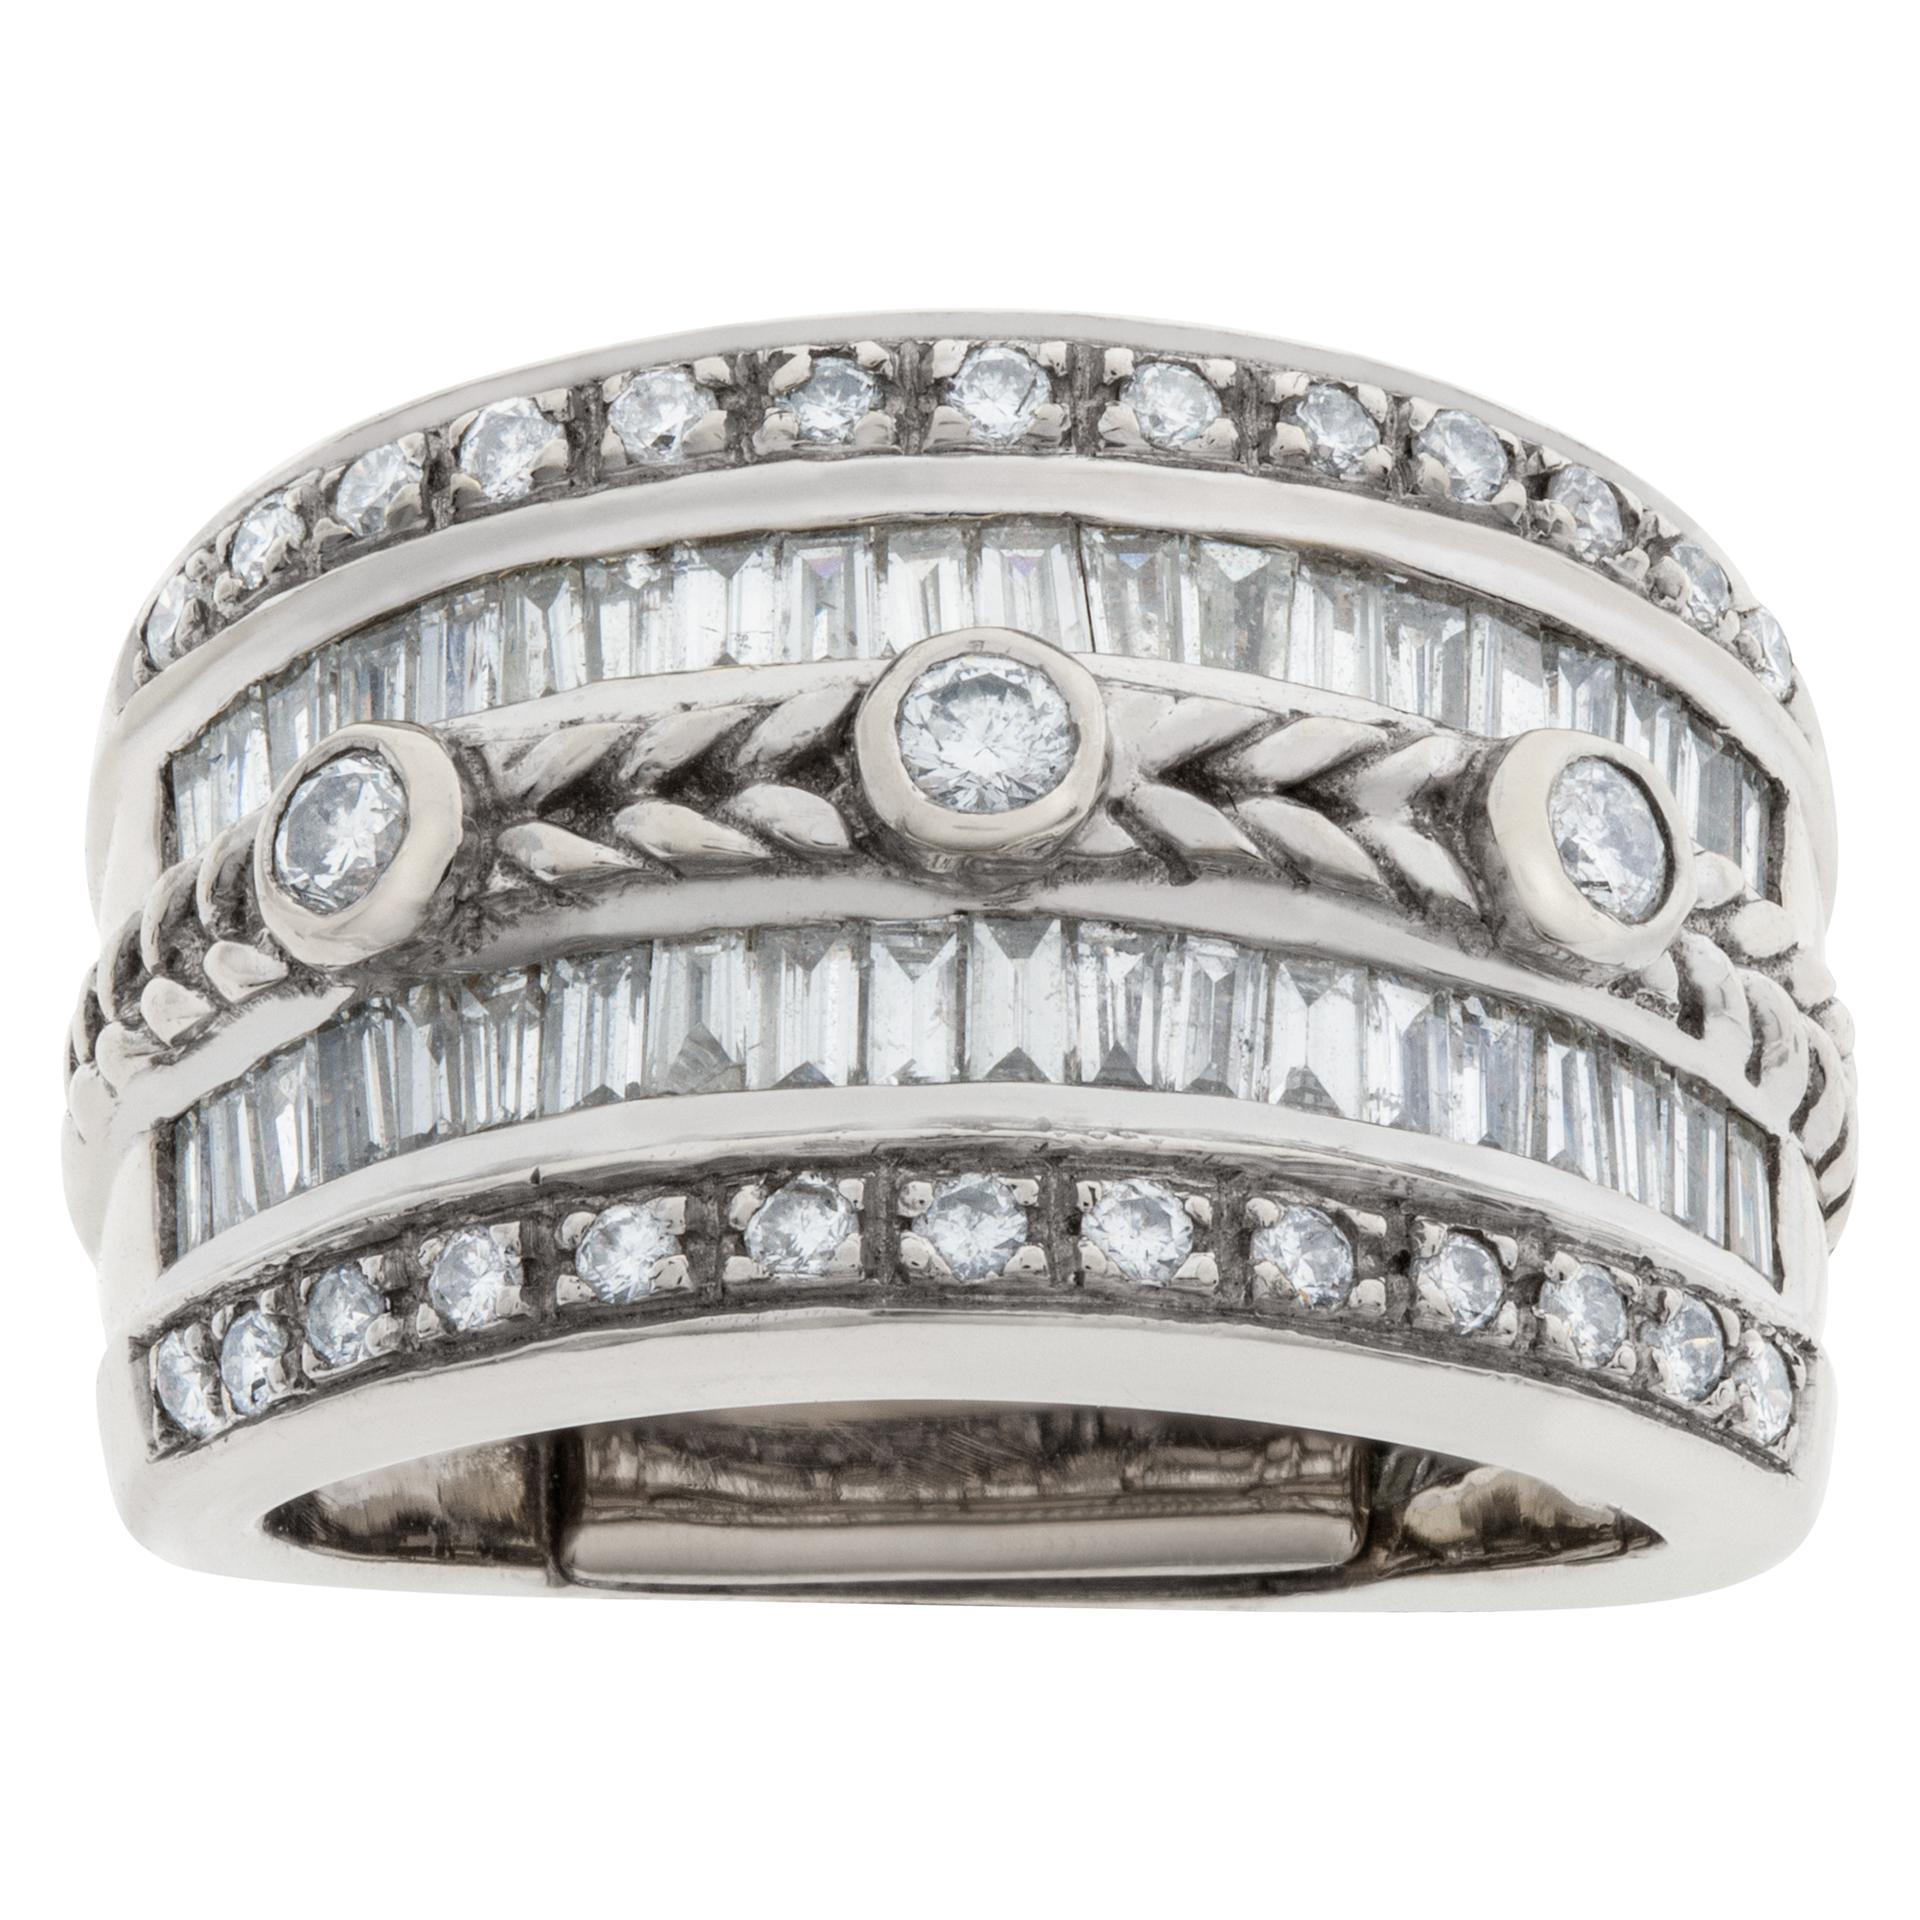 Beautiful 18k white gold ring with app. 1.25 carats in round and baguette diamonds image 1